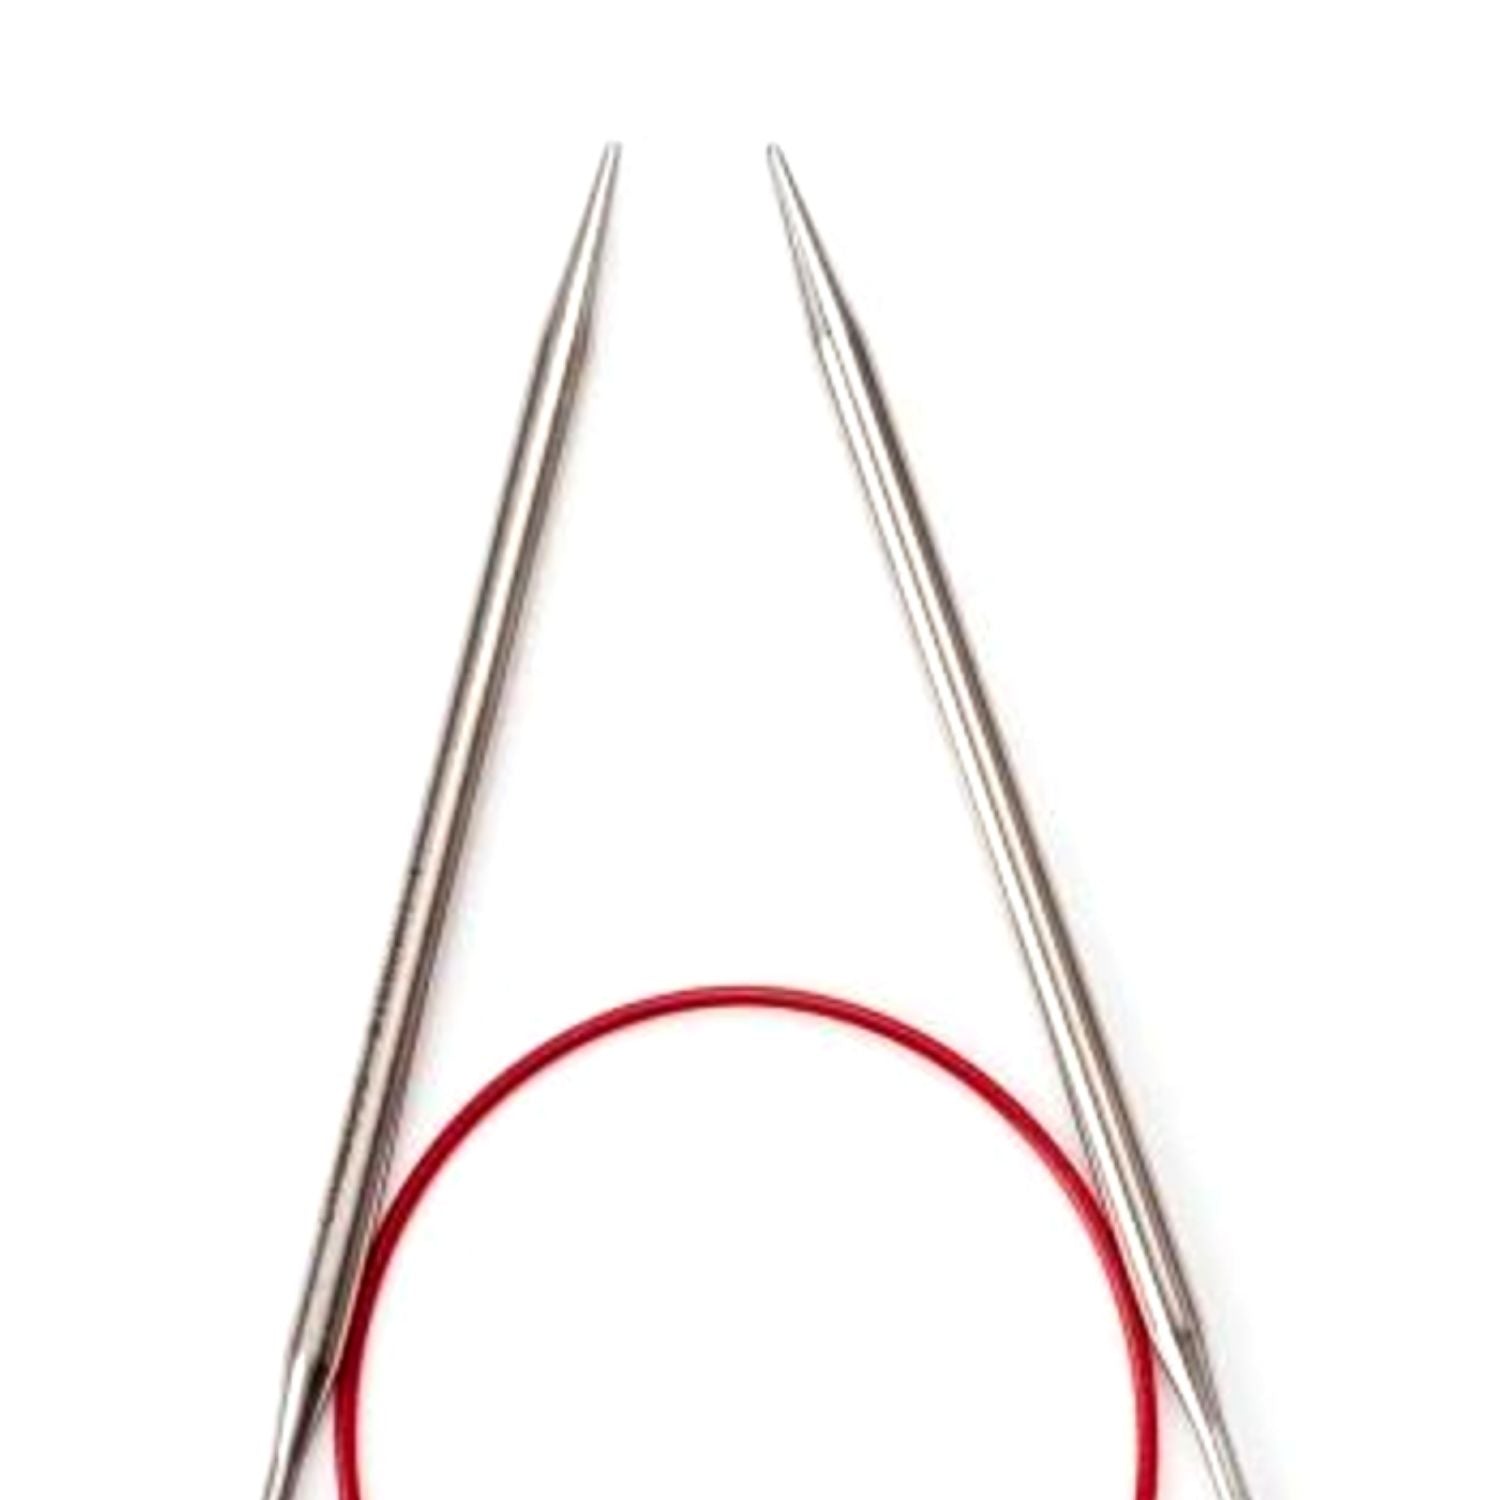 12” ChiaoGoo - Red Stainless Steel Circular Knitting Needles – The